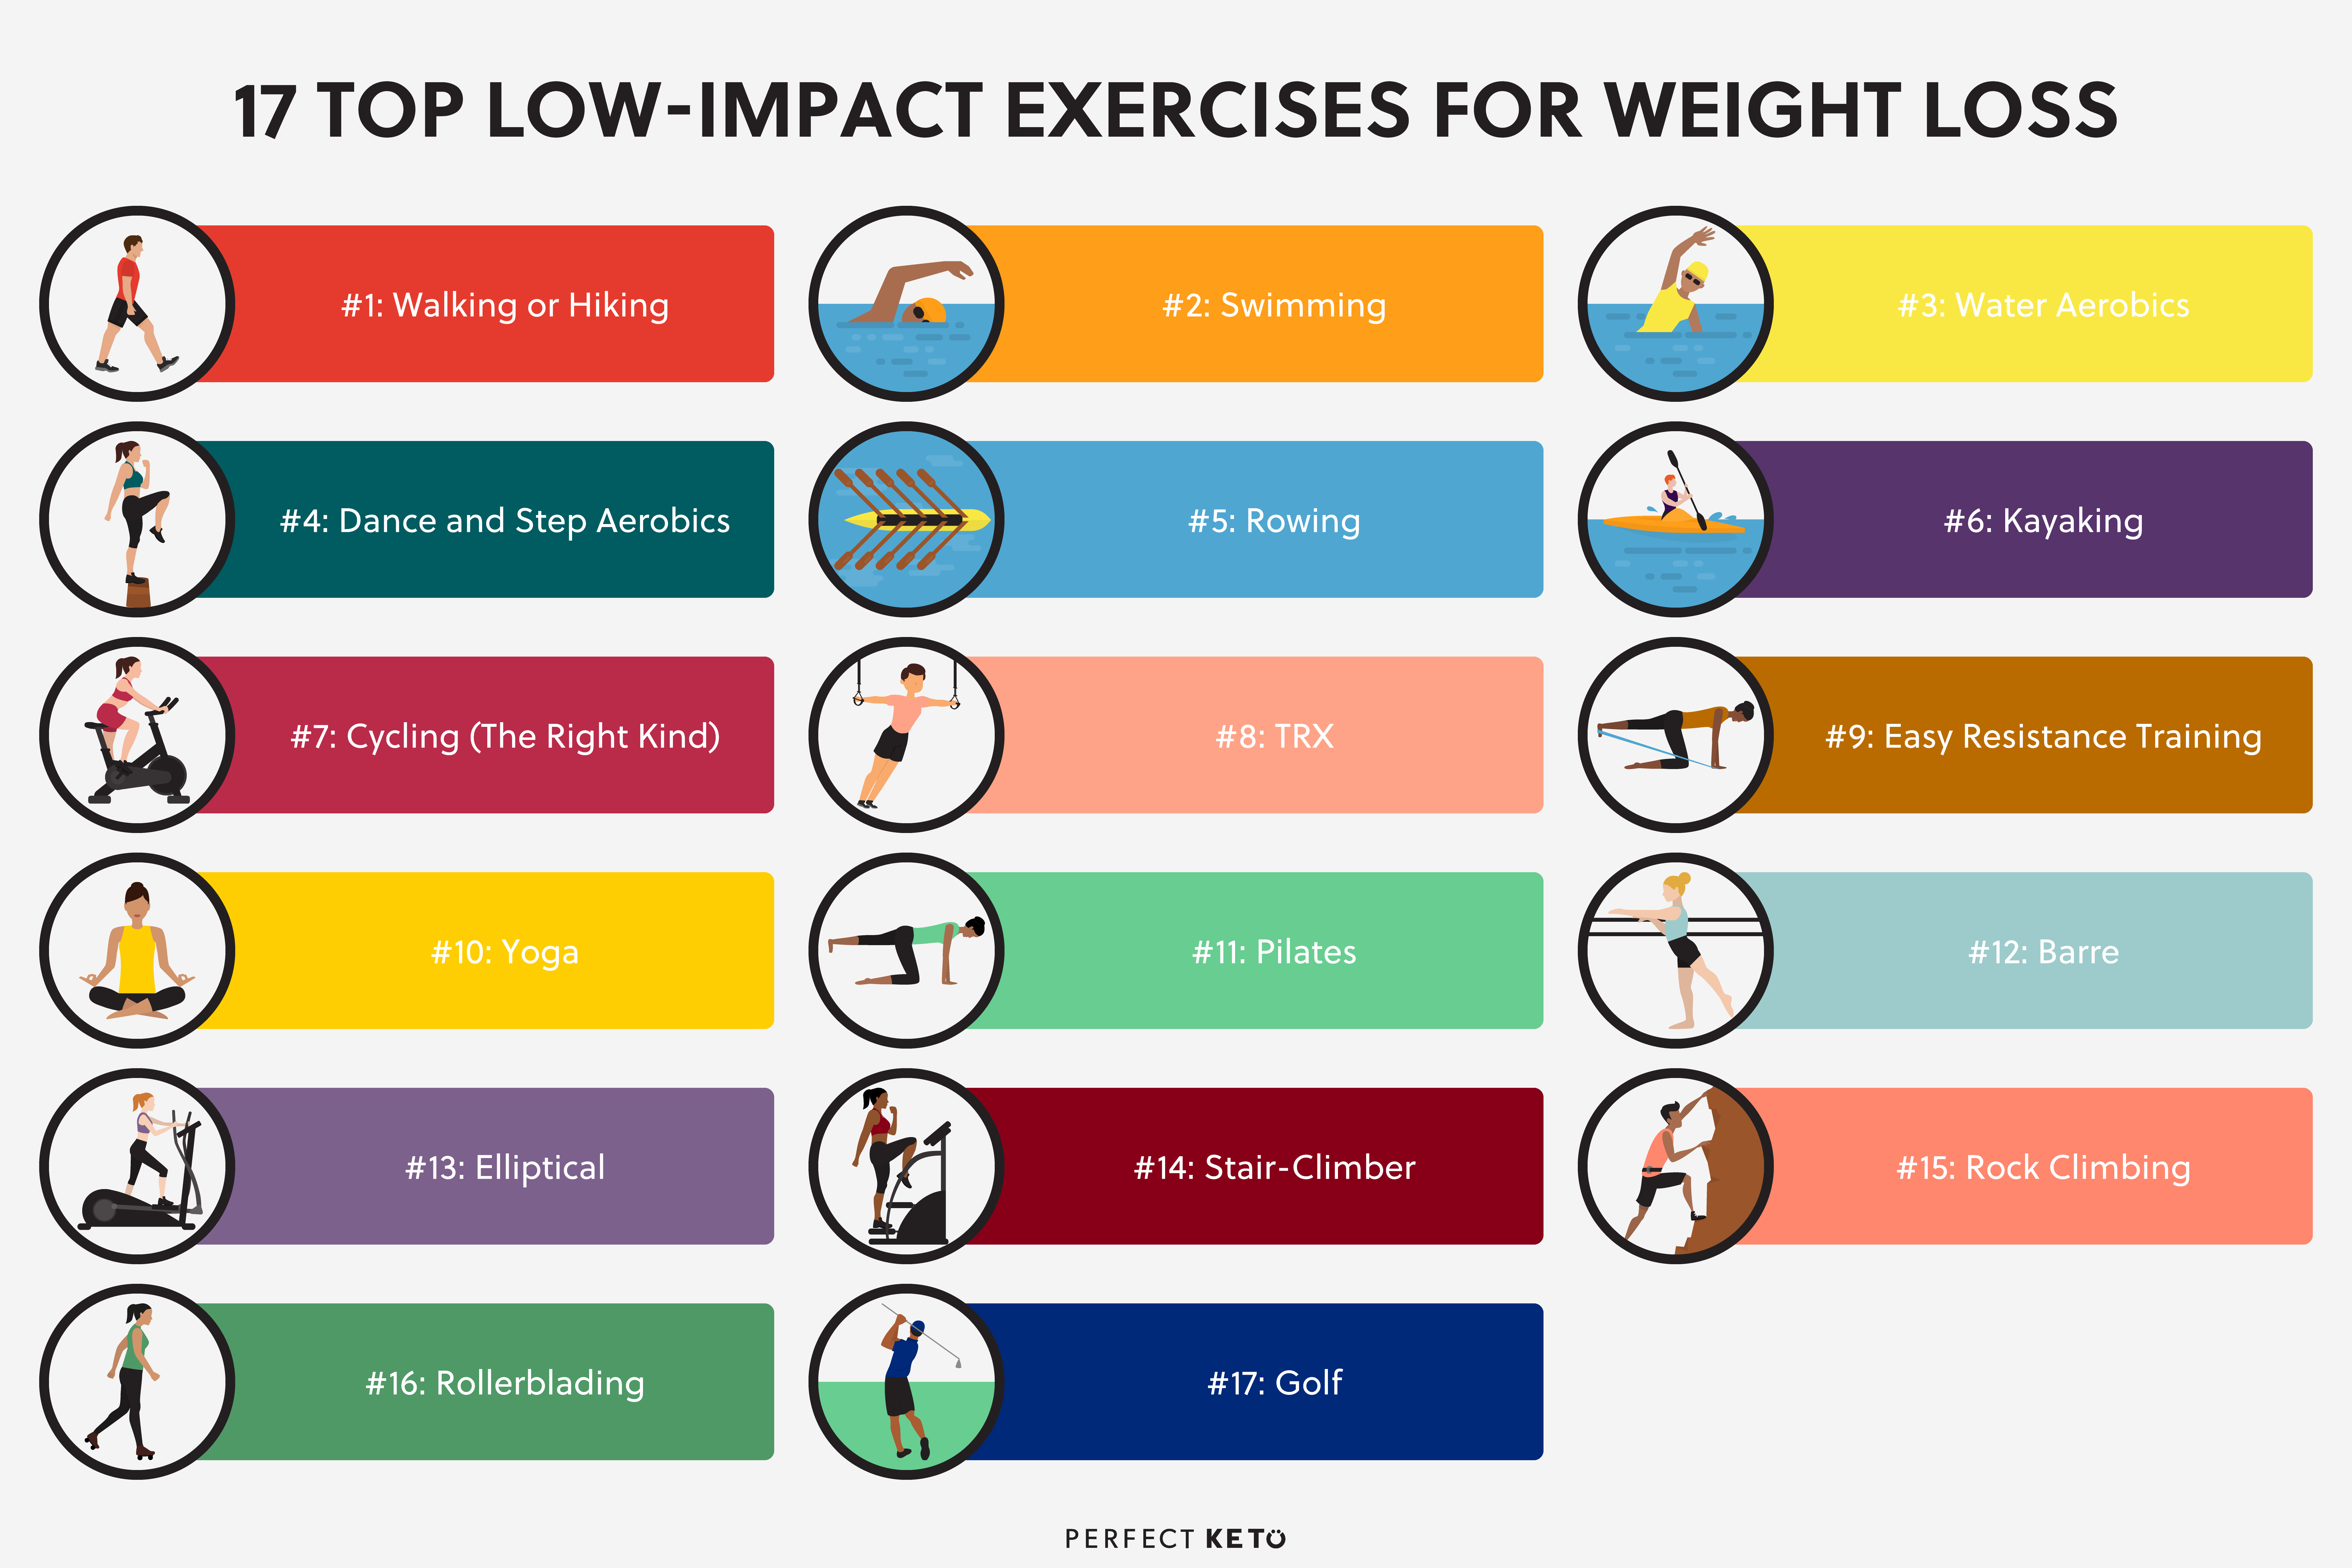 5 Benefits of Low-Impact Exercise